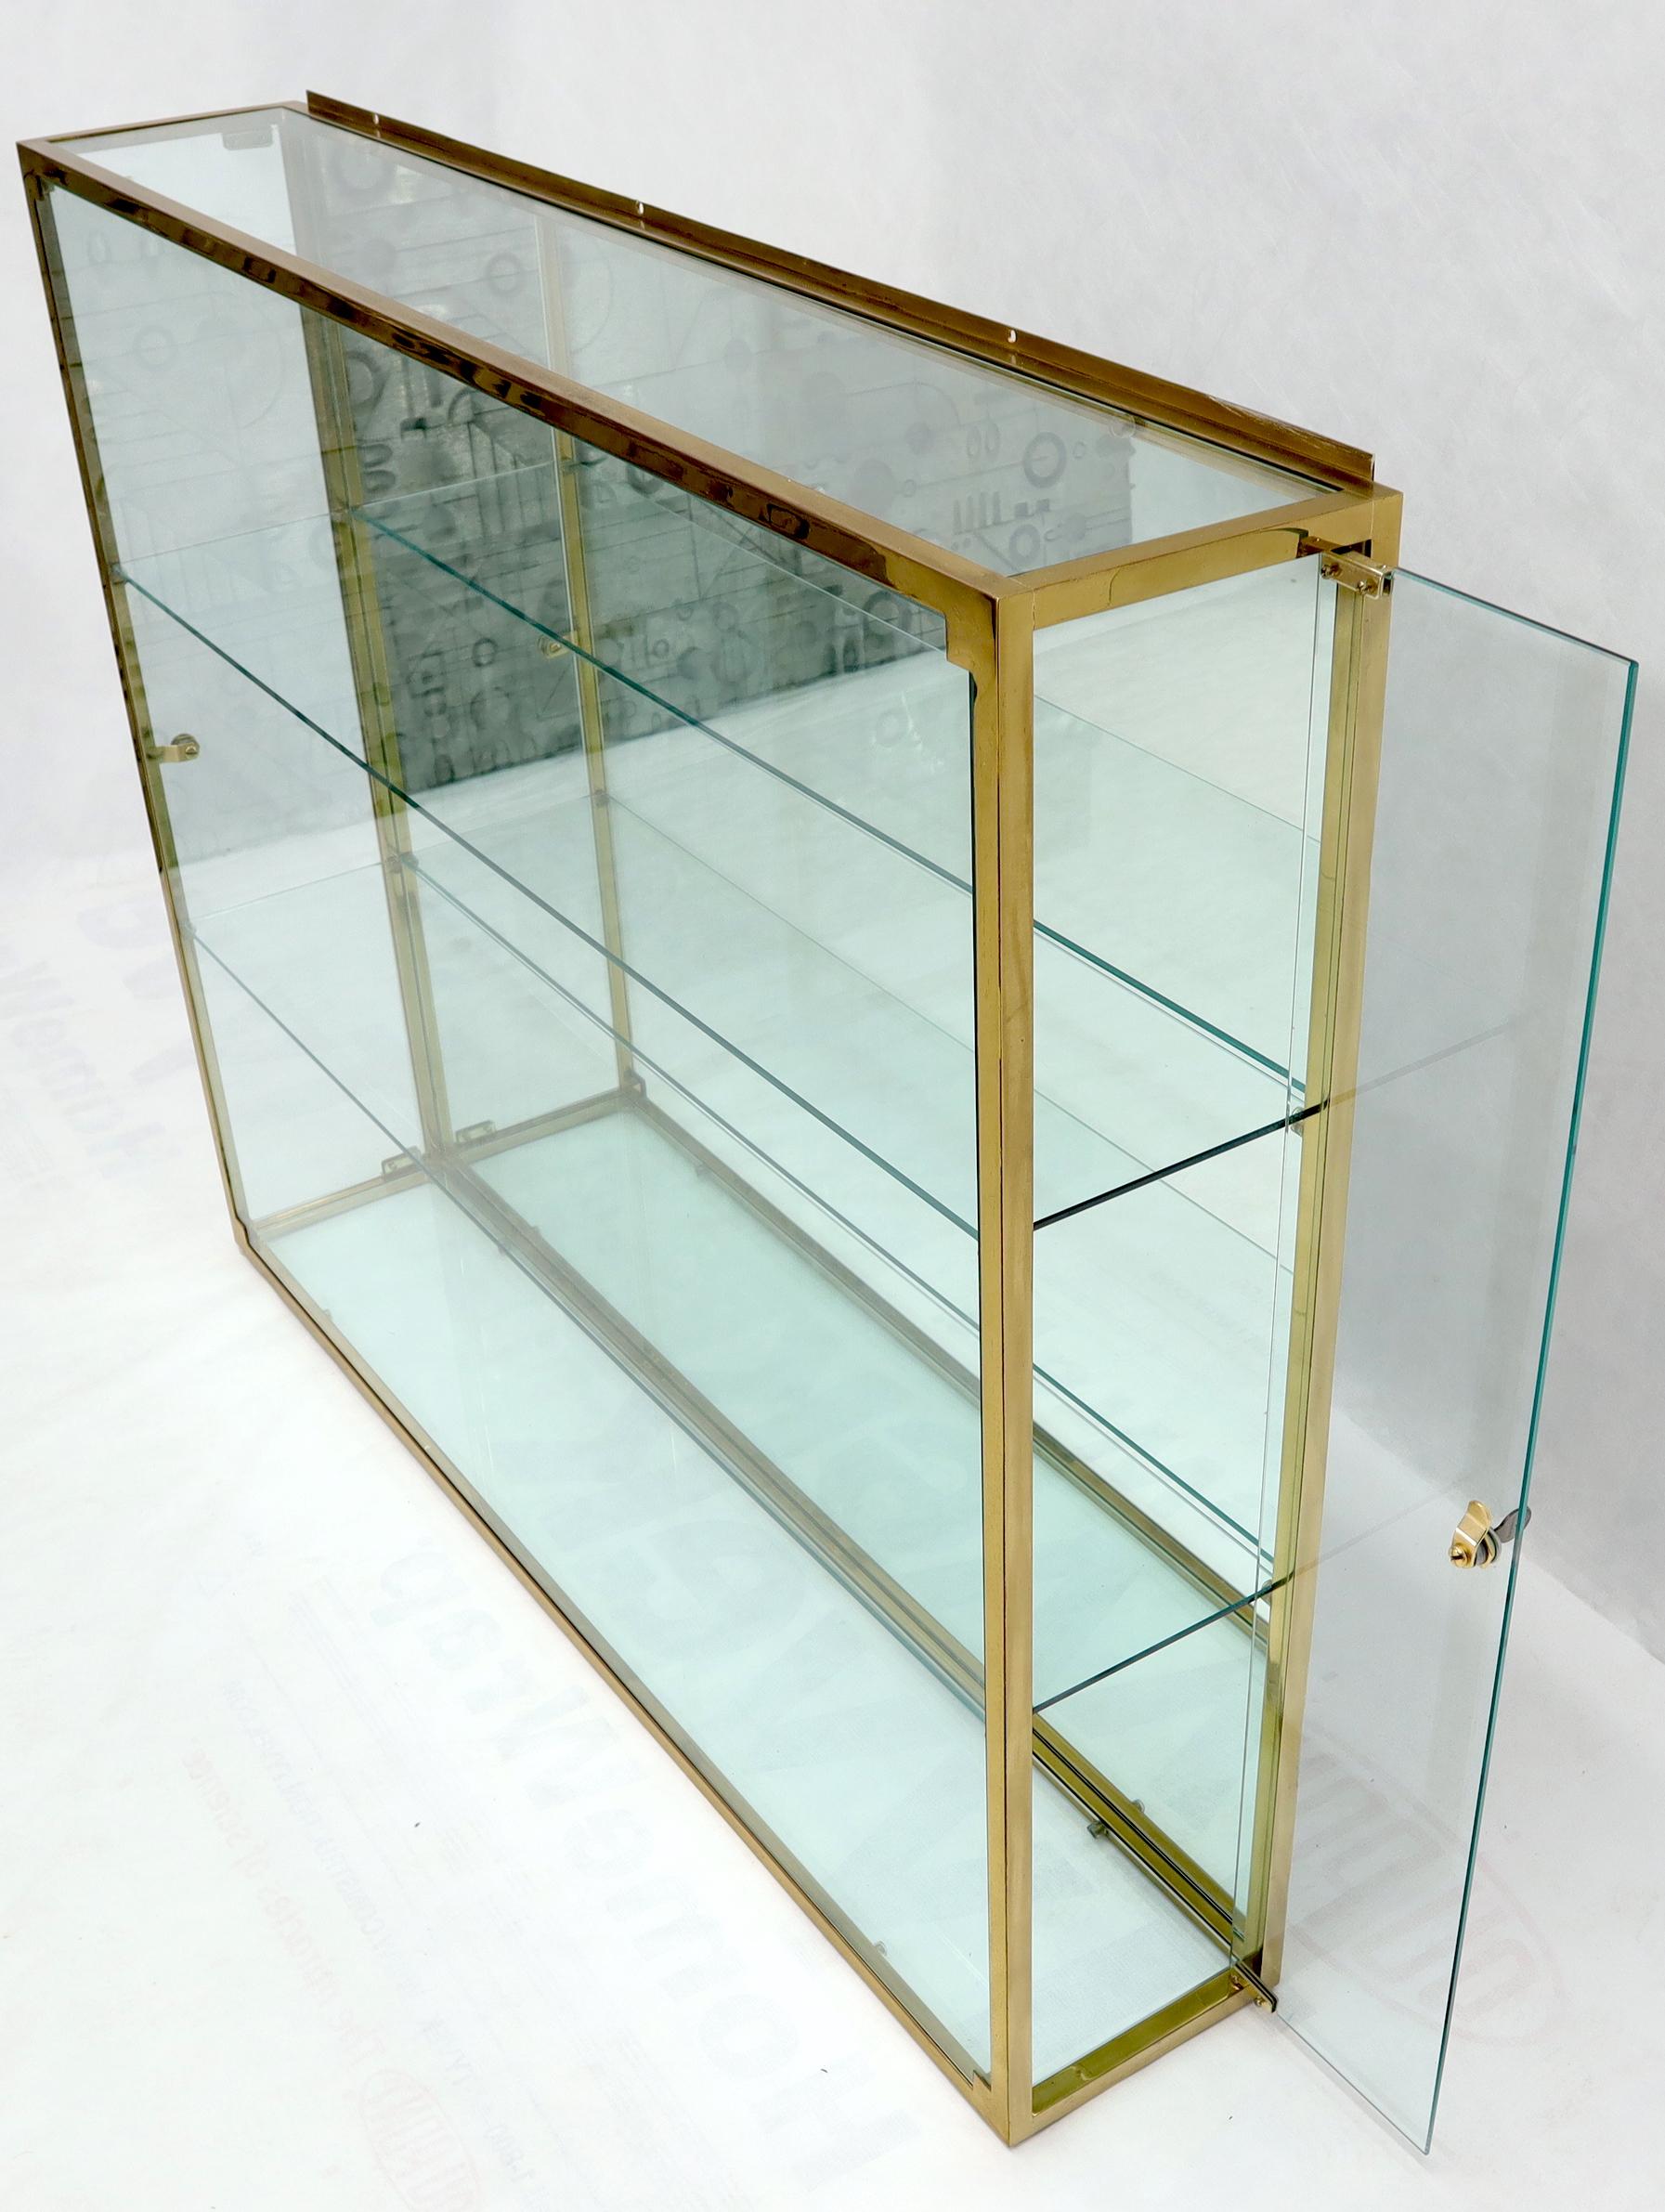 20th Century Large Solid Brass Frame Square Hanging Wall Unit Display Case Shelves Unit